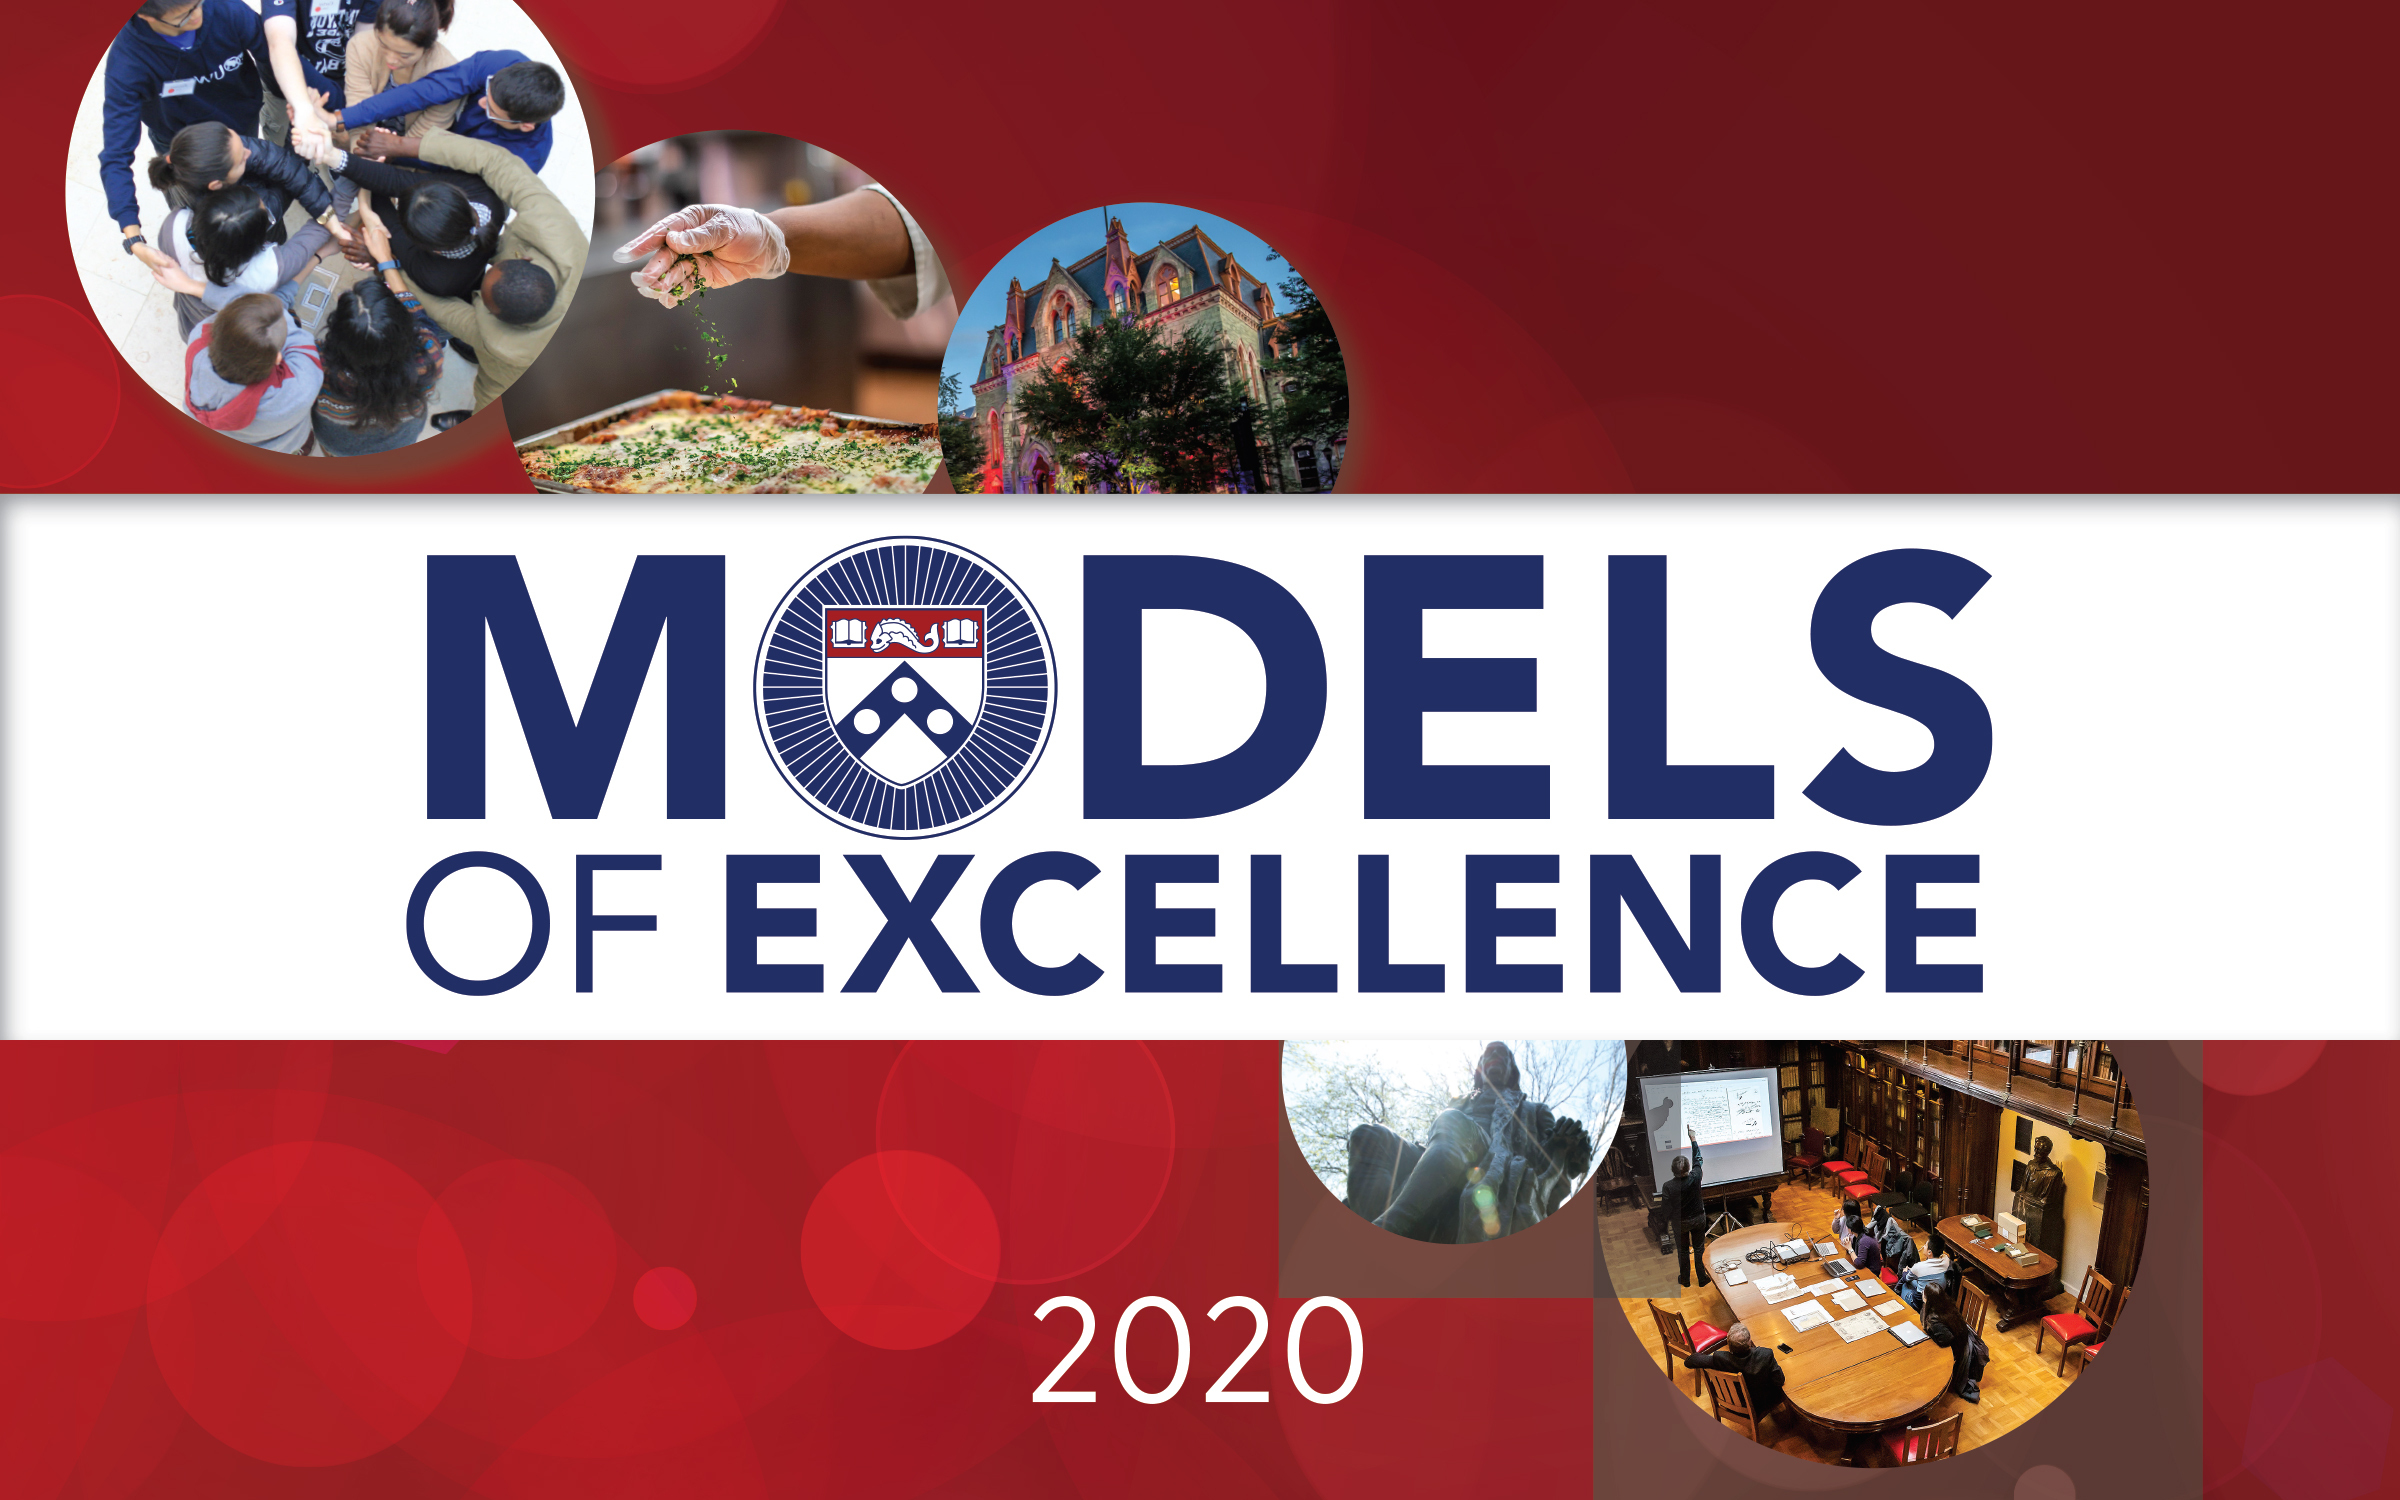 E-book cover of Model of Excellence 2020 awards with pictures from around Penn campus